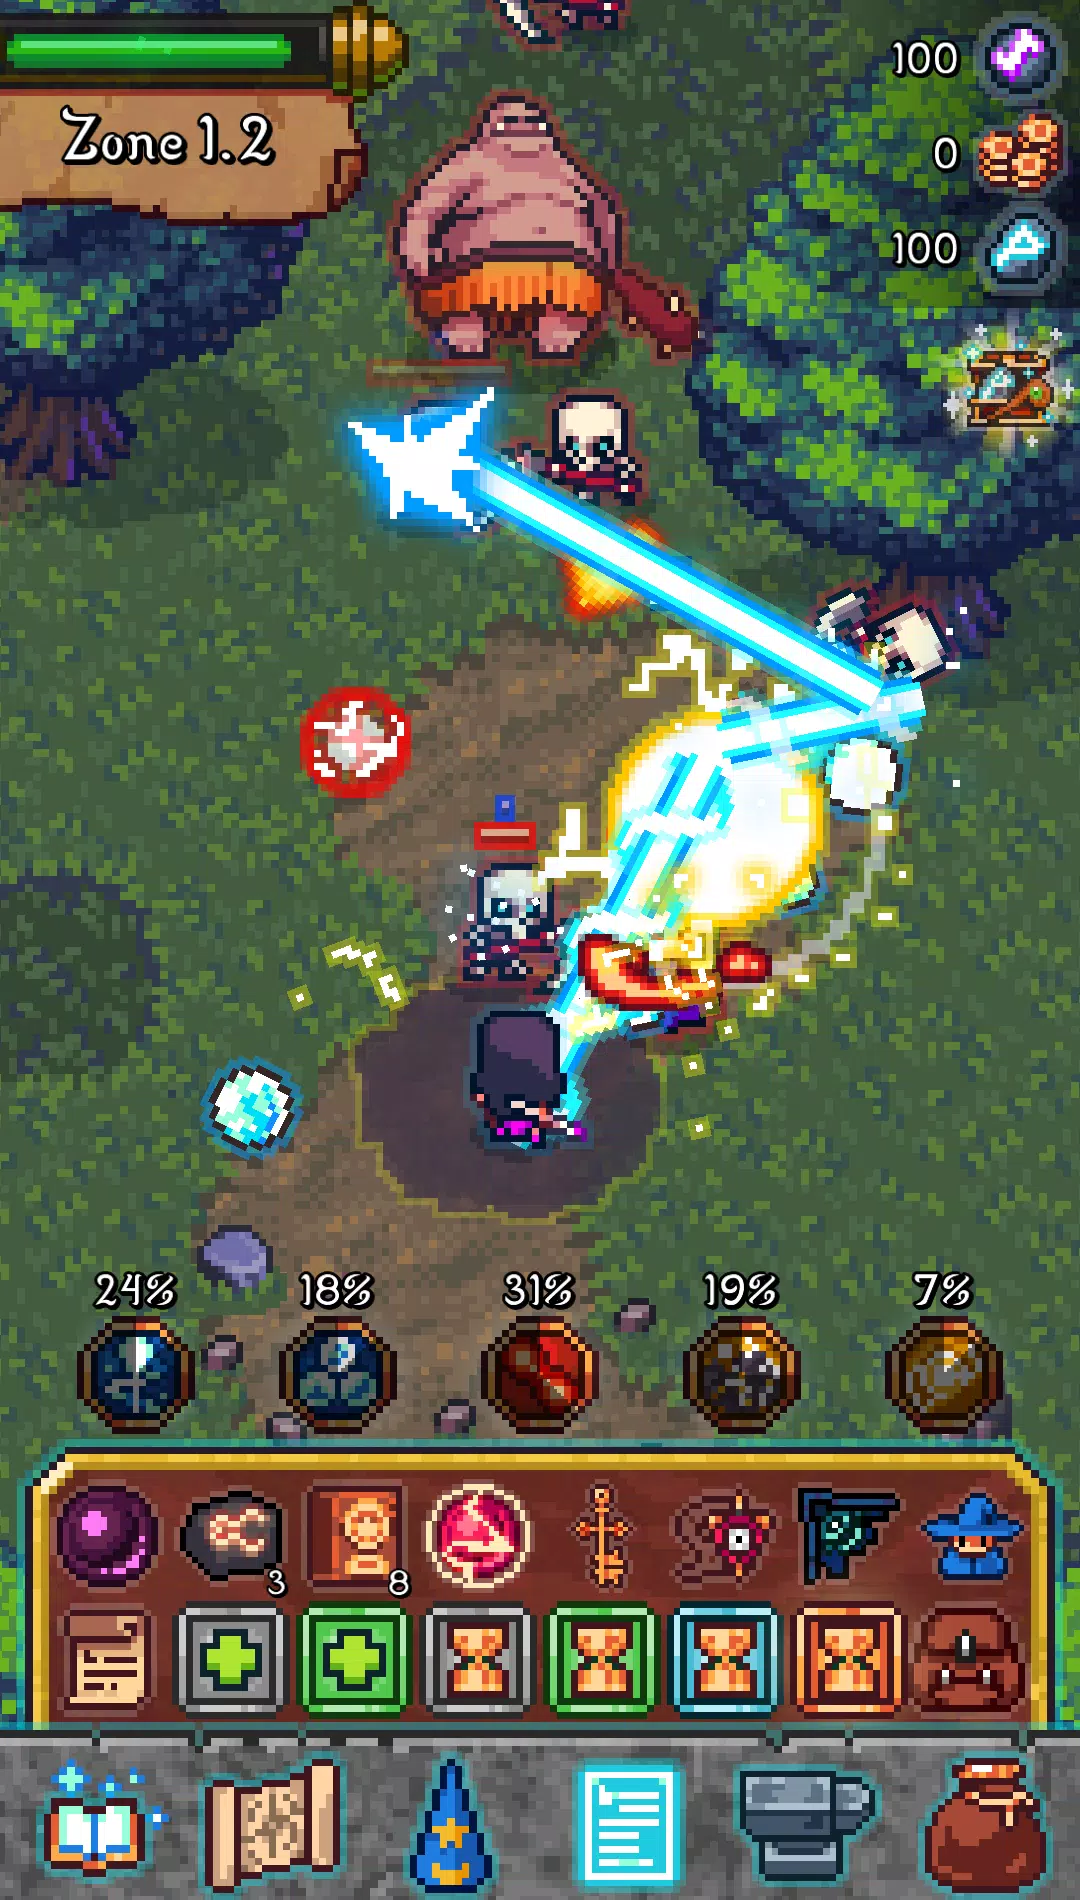 Wizard of Legend 2 android iOS-TapTap